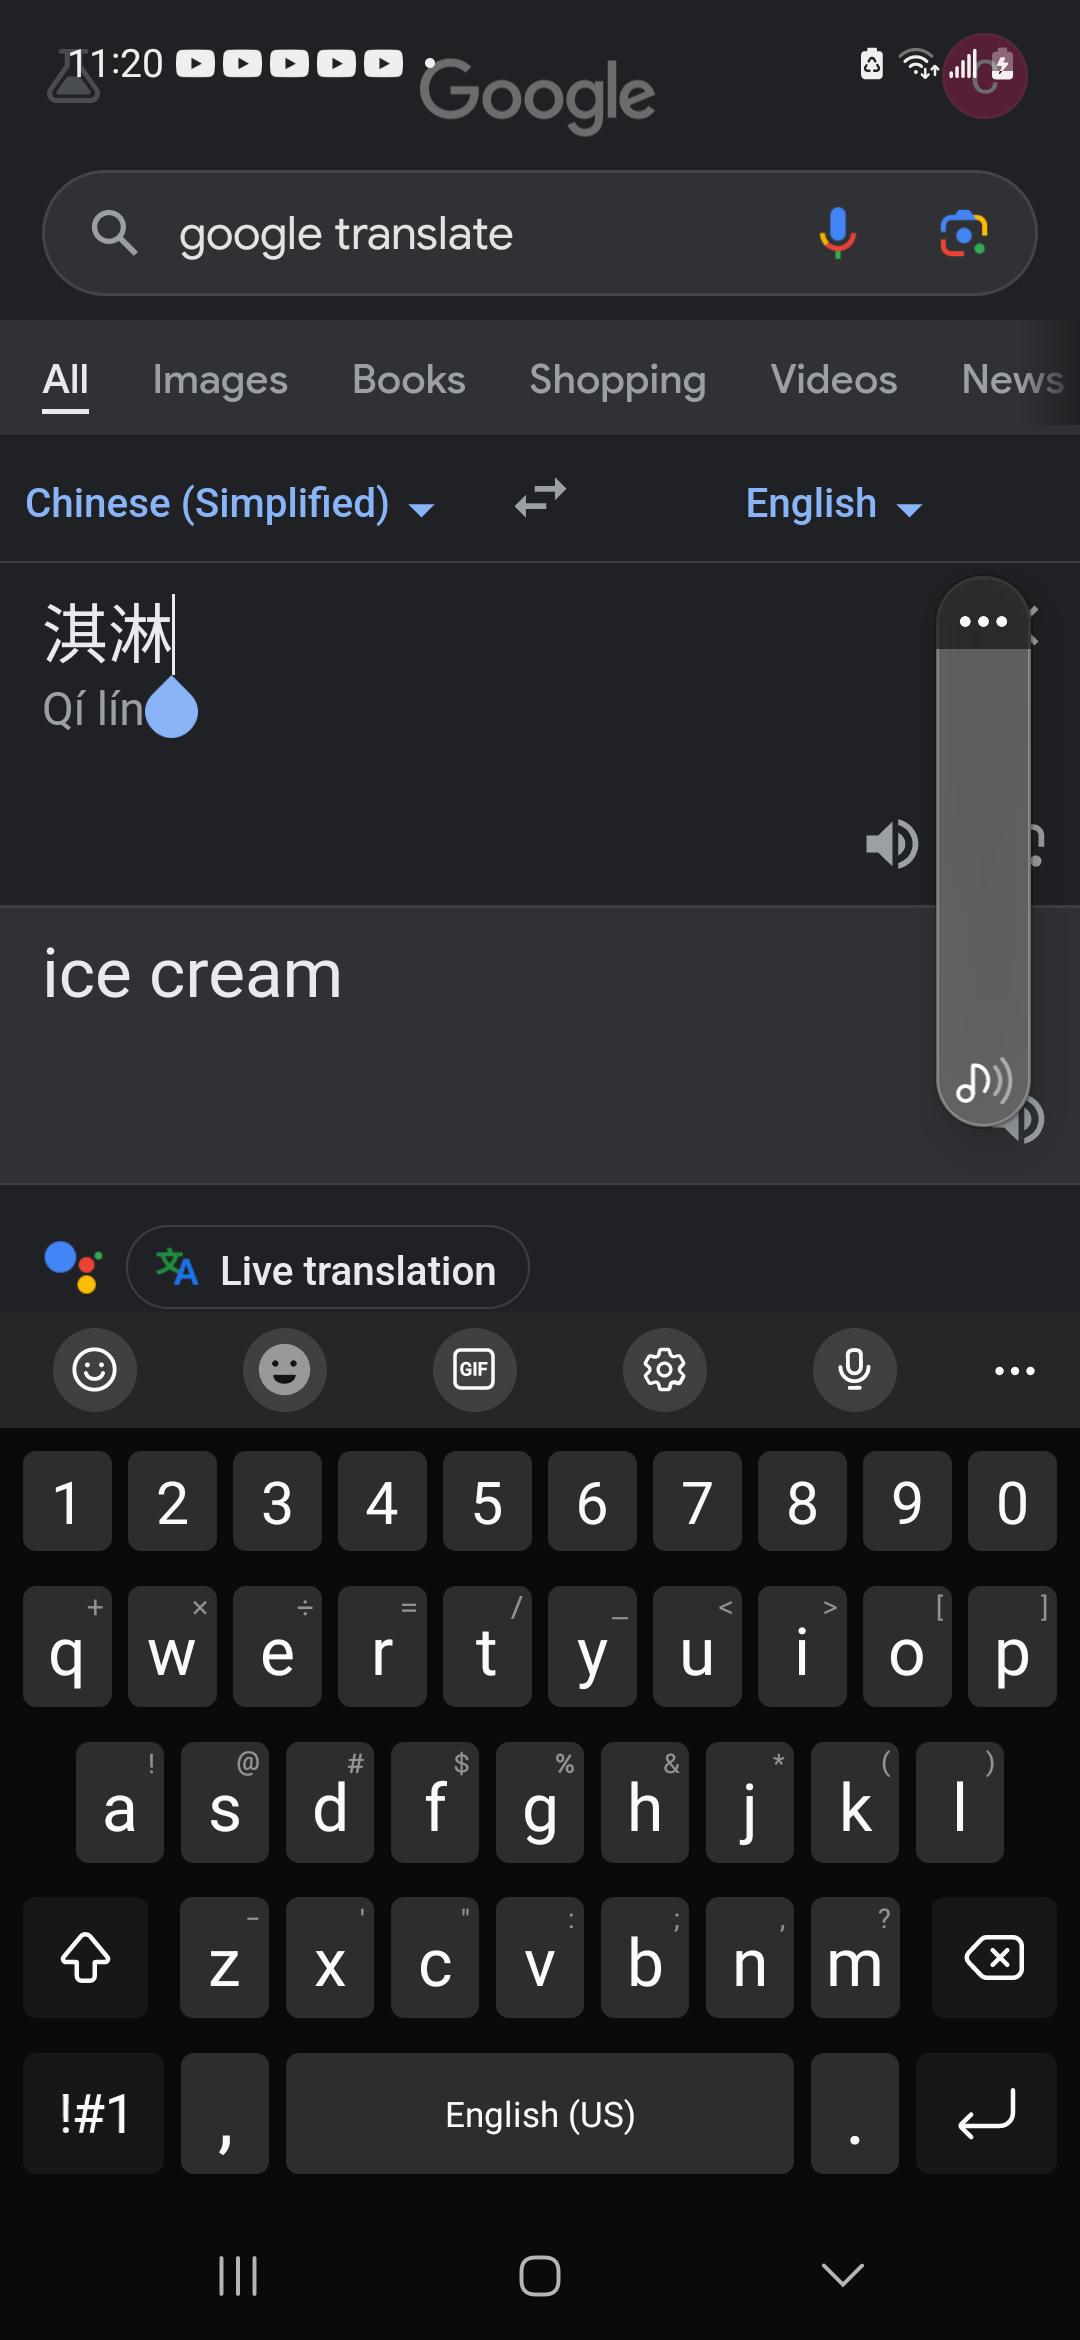 What Is Ice Cream in Chinese: Translating Ice Cream into Chinese